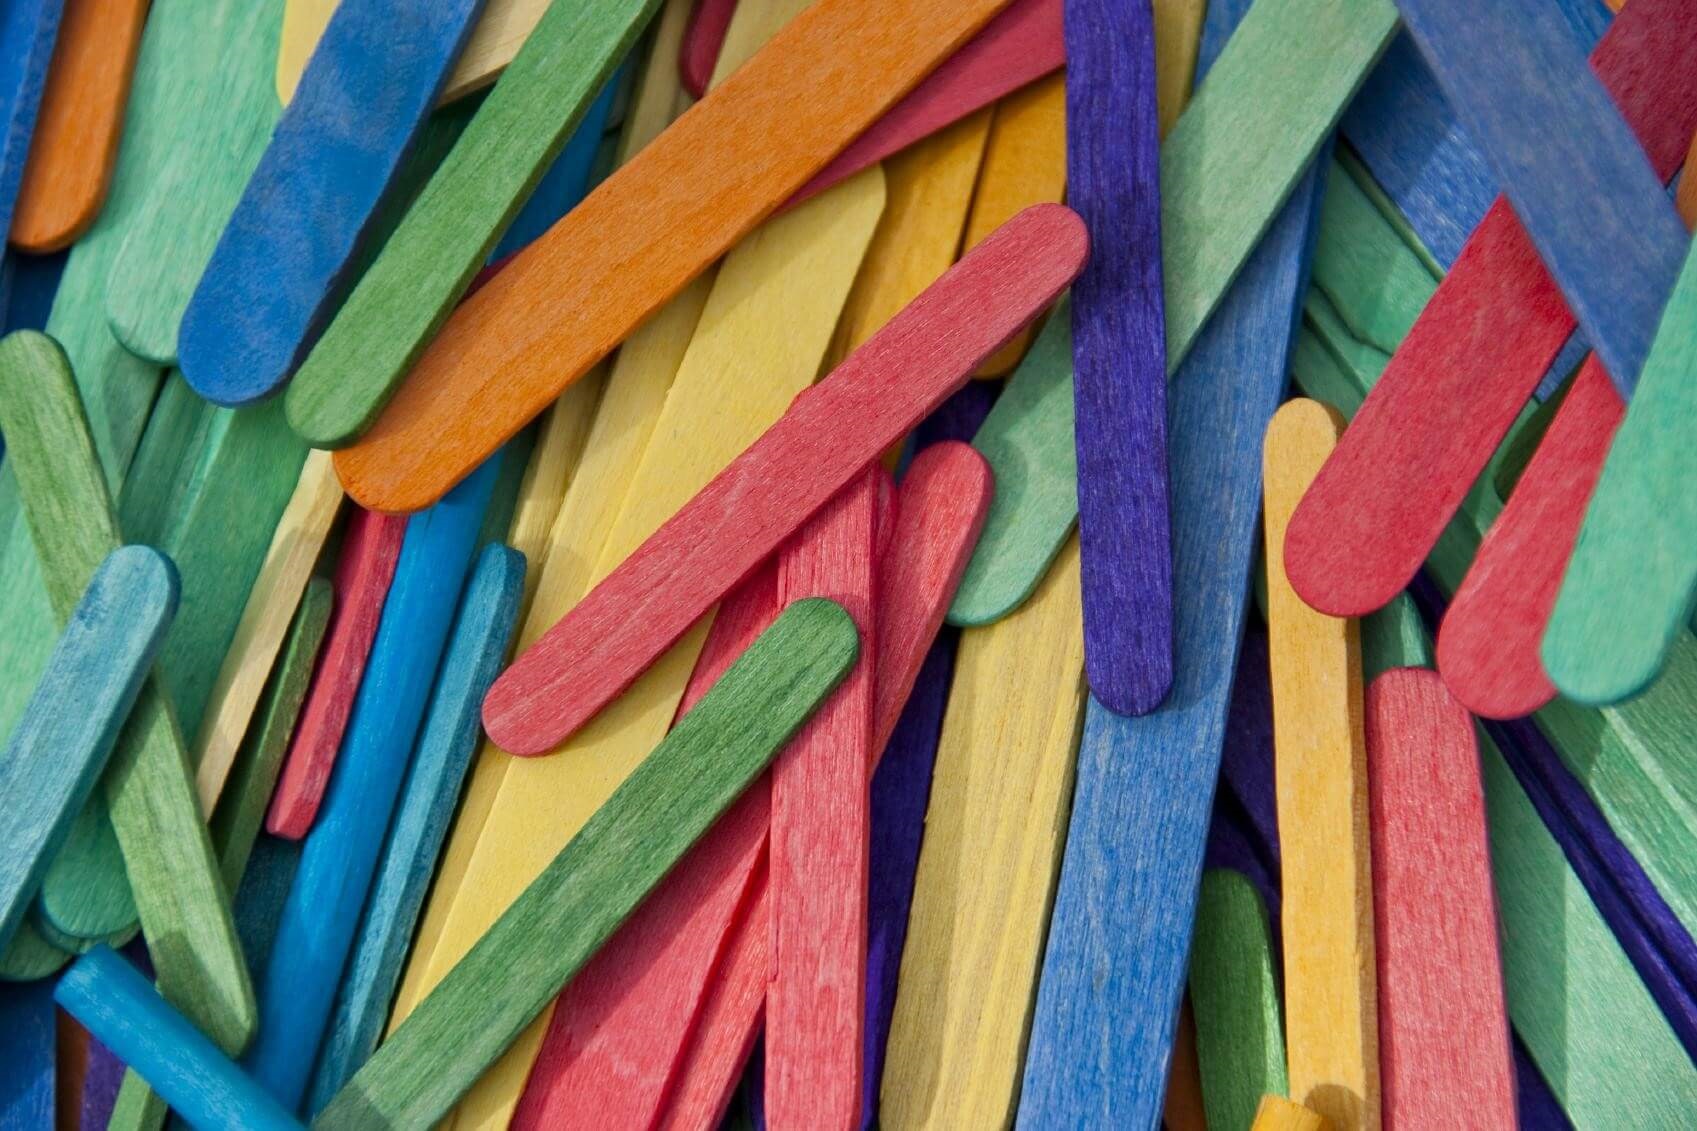 5 Ways to Use Craft Sticks for Play - FamilyEducation